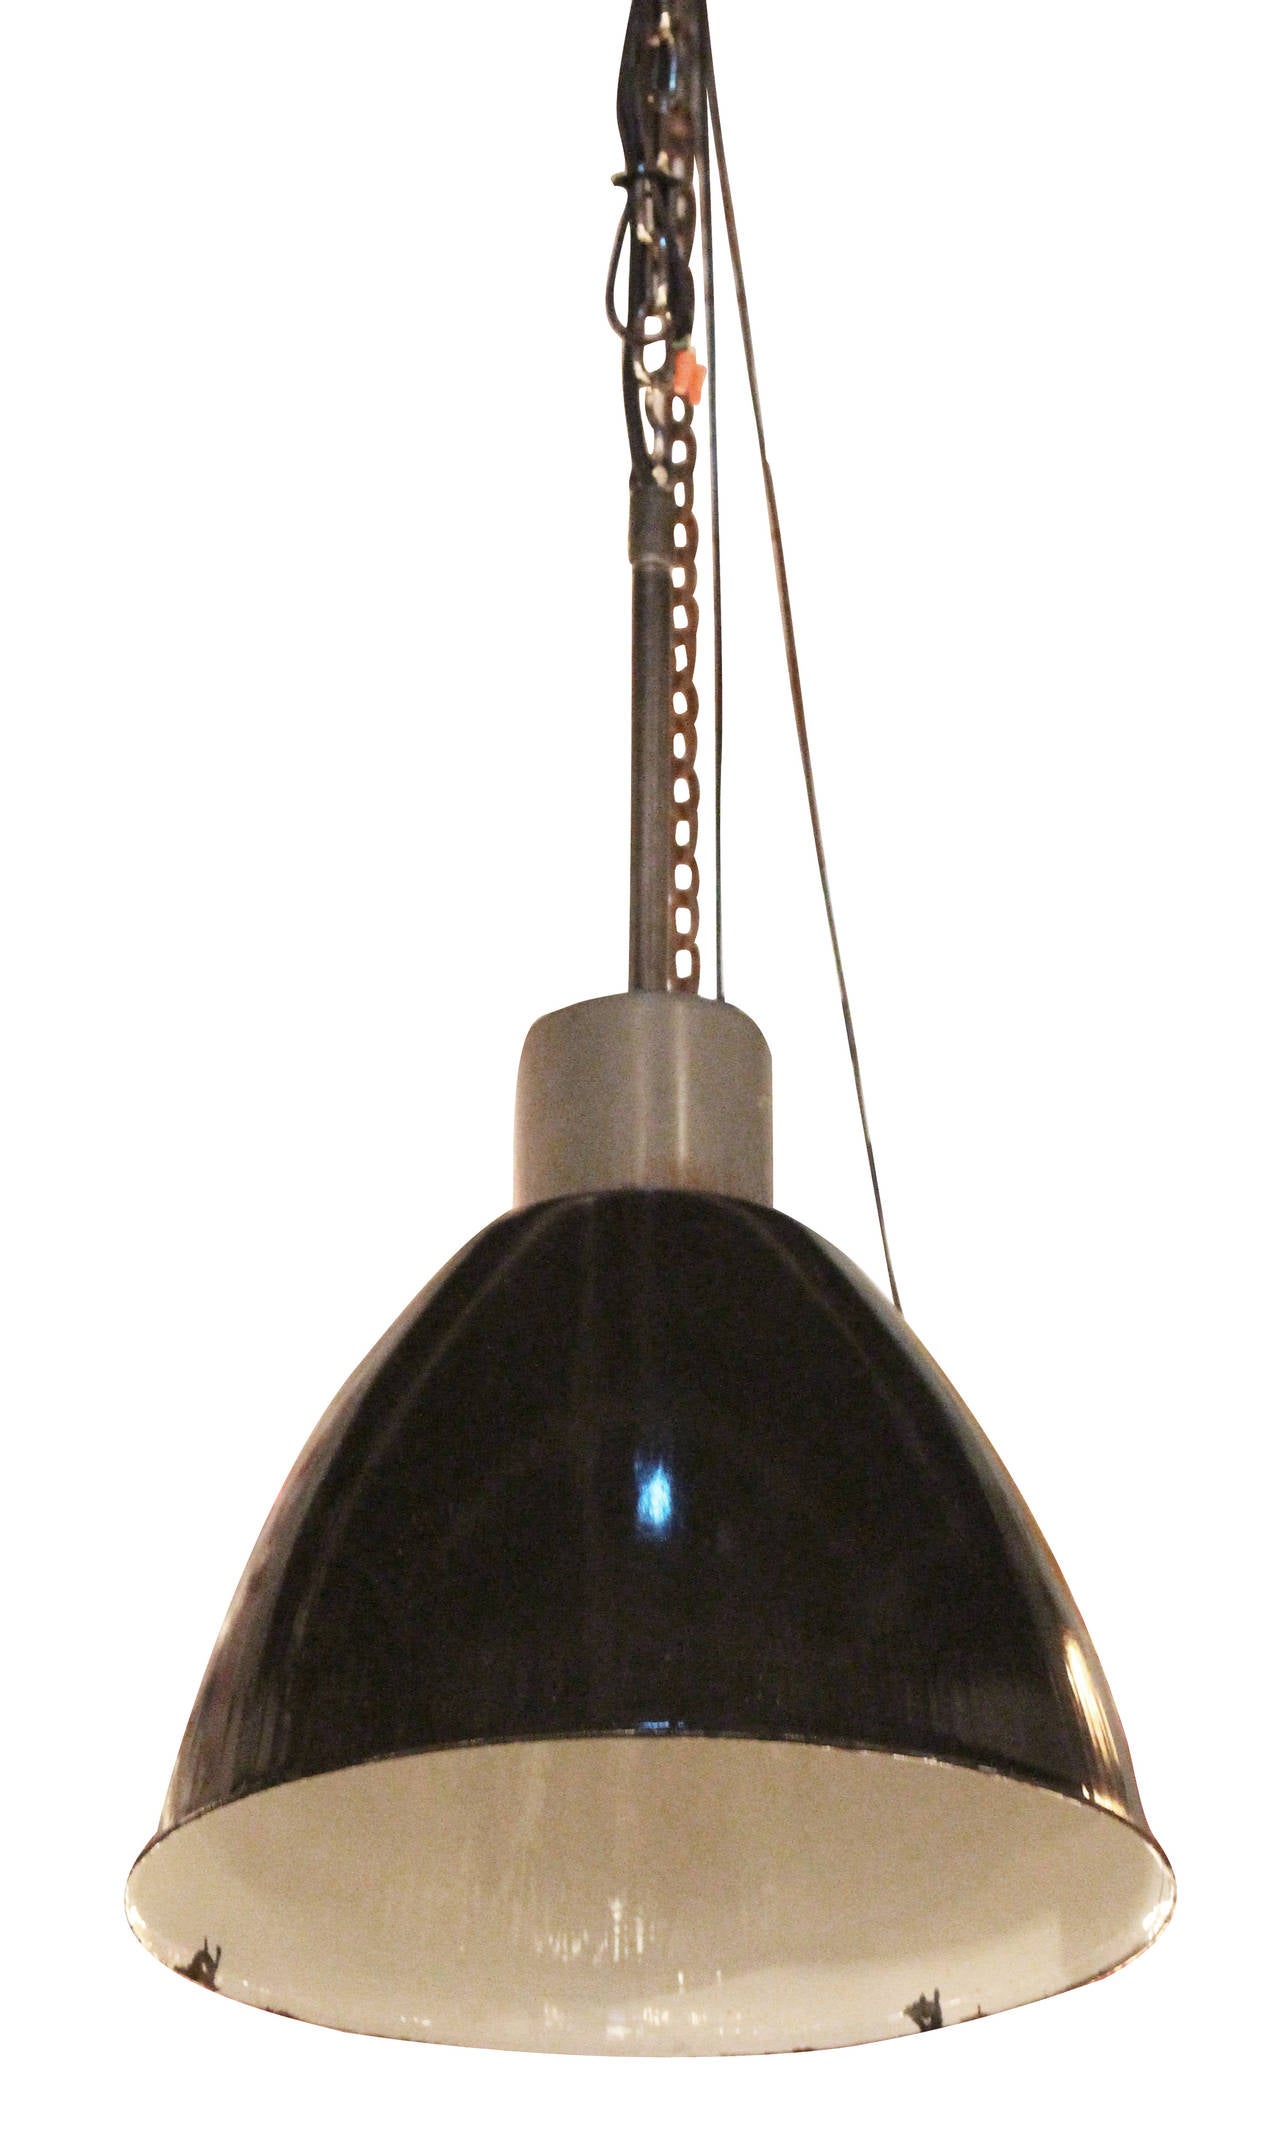 These are great oversized enamel Industrial lights from Germany. Old new stock never used. The exterior is slightly speckled black enamel with a clean white enamel interior. The simple gray painted fitter on top makes these lights easy to retrofit